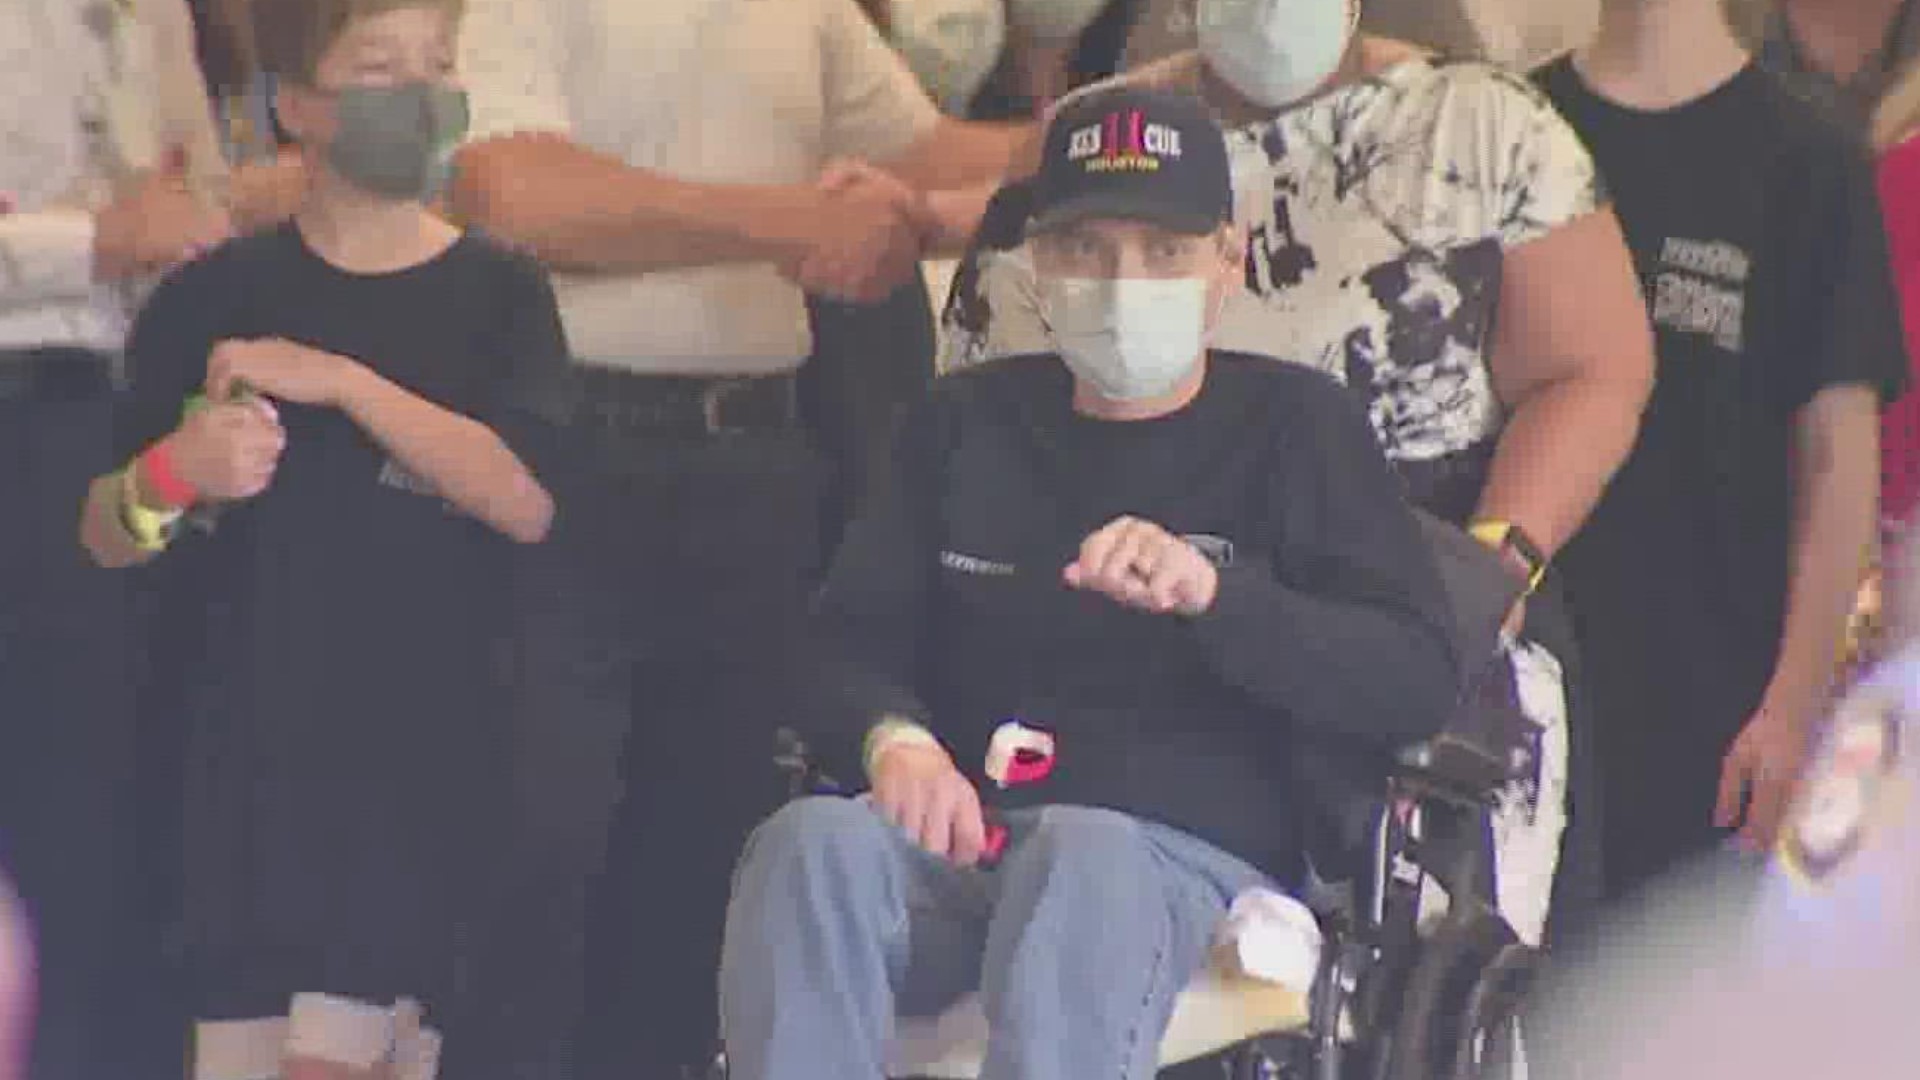 Houston firefighter Wayne Davis released from hospital Friday. He was met with a cheering crowd of family, friends and doctors at Memorial Hermann Hospital.